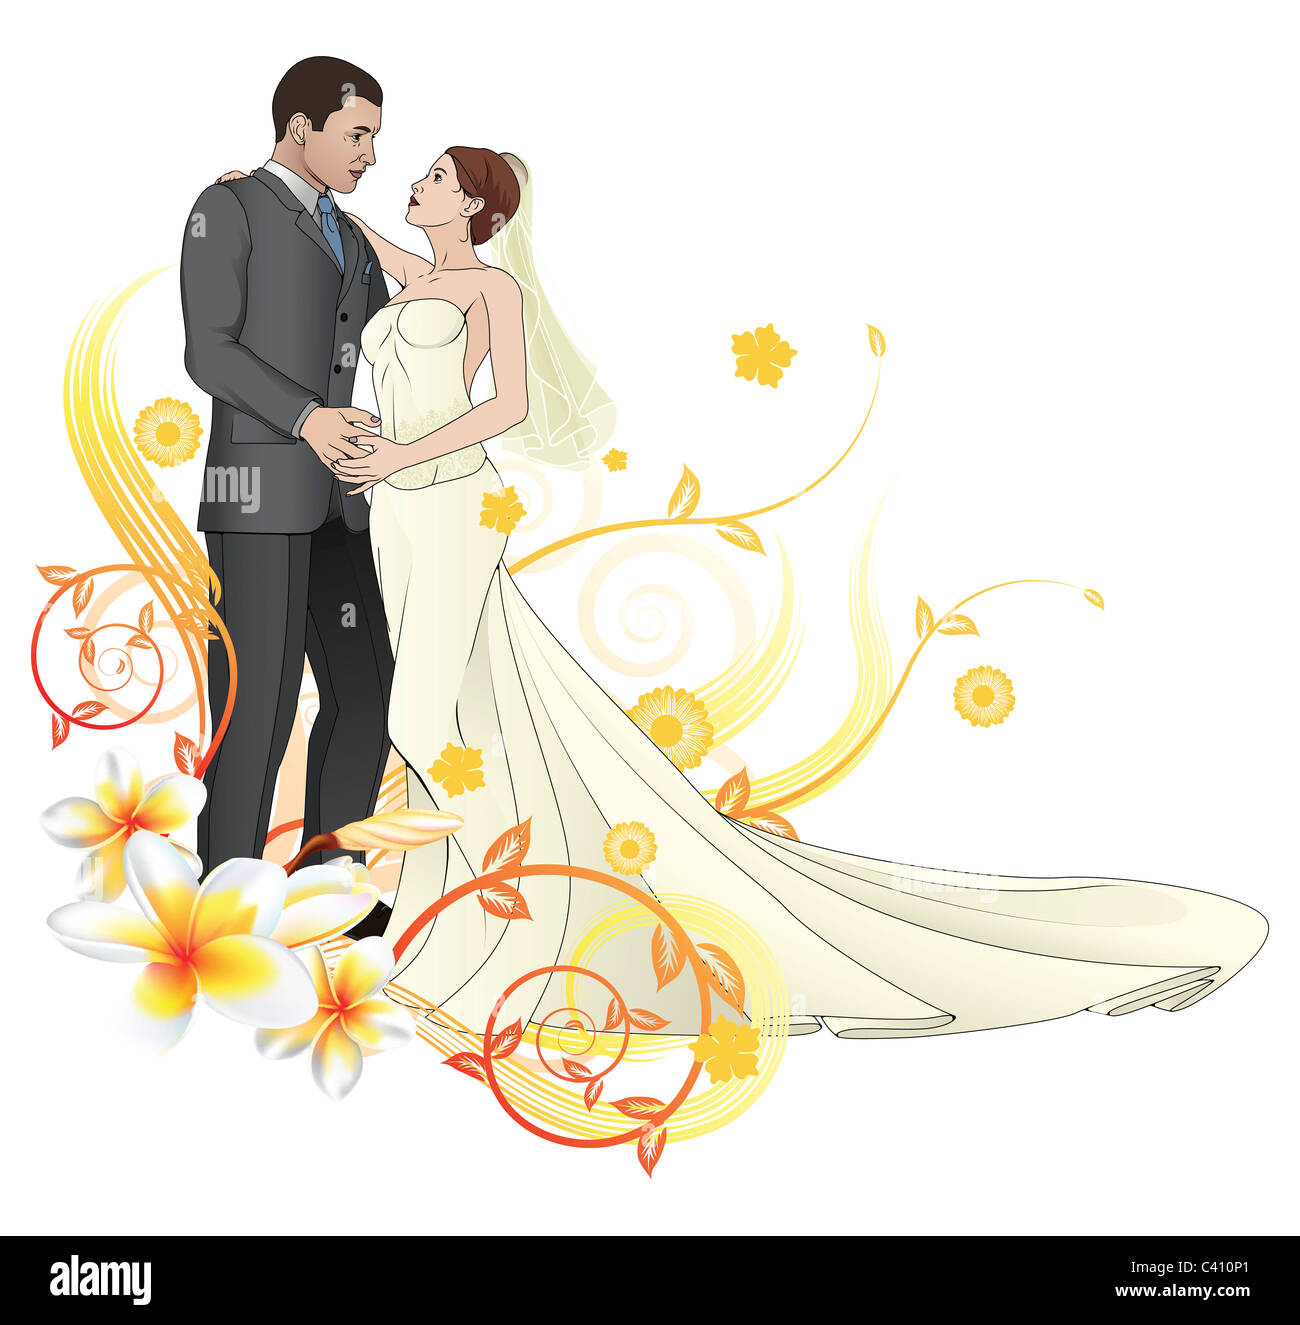 Bride and groom looking into each others eyes dancing abstract floral background Stock Photo